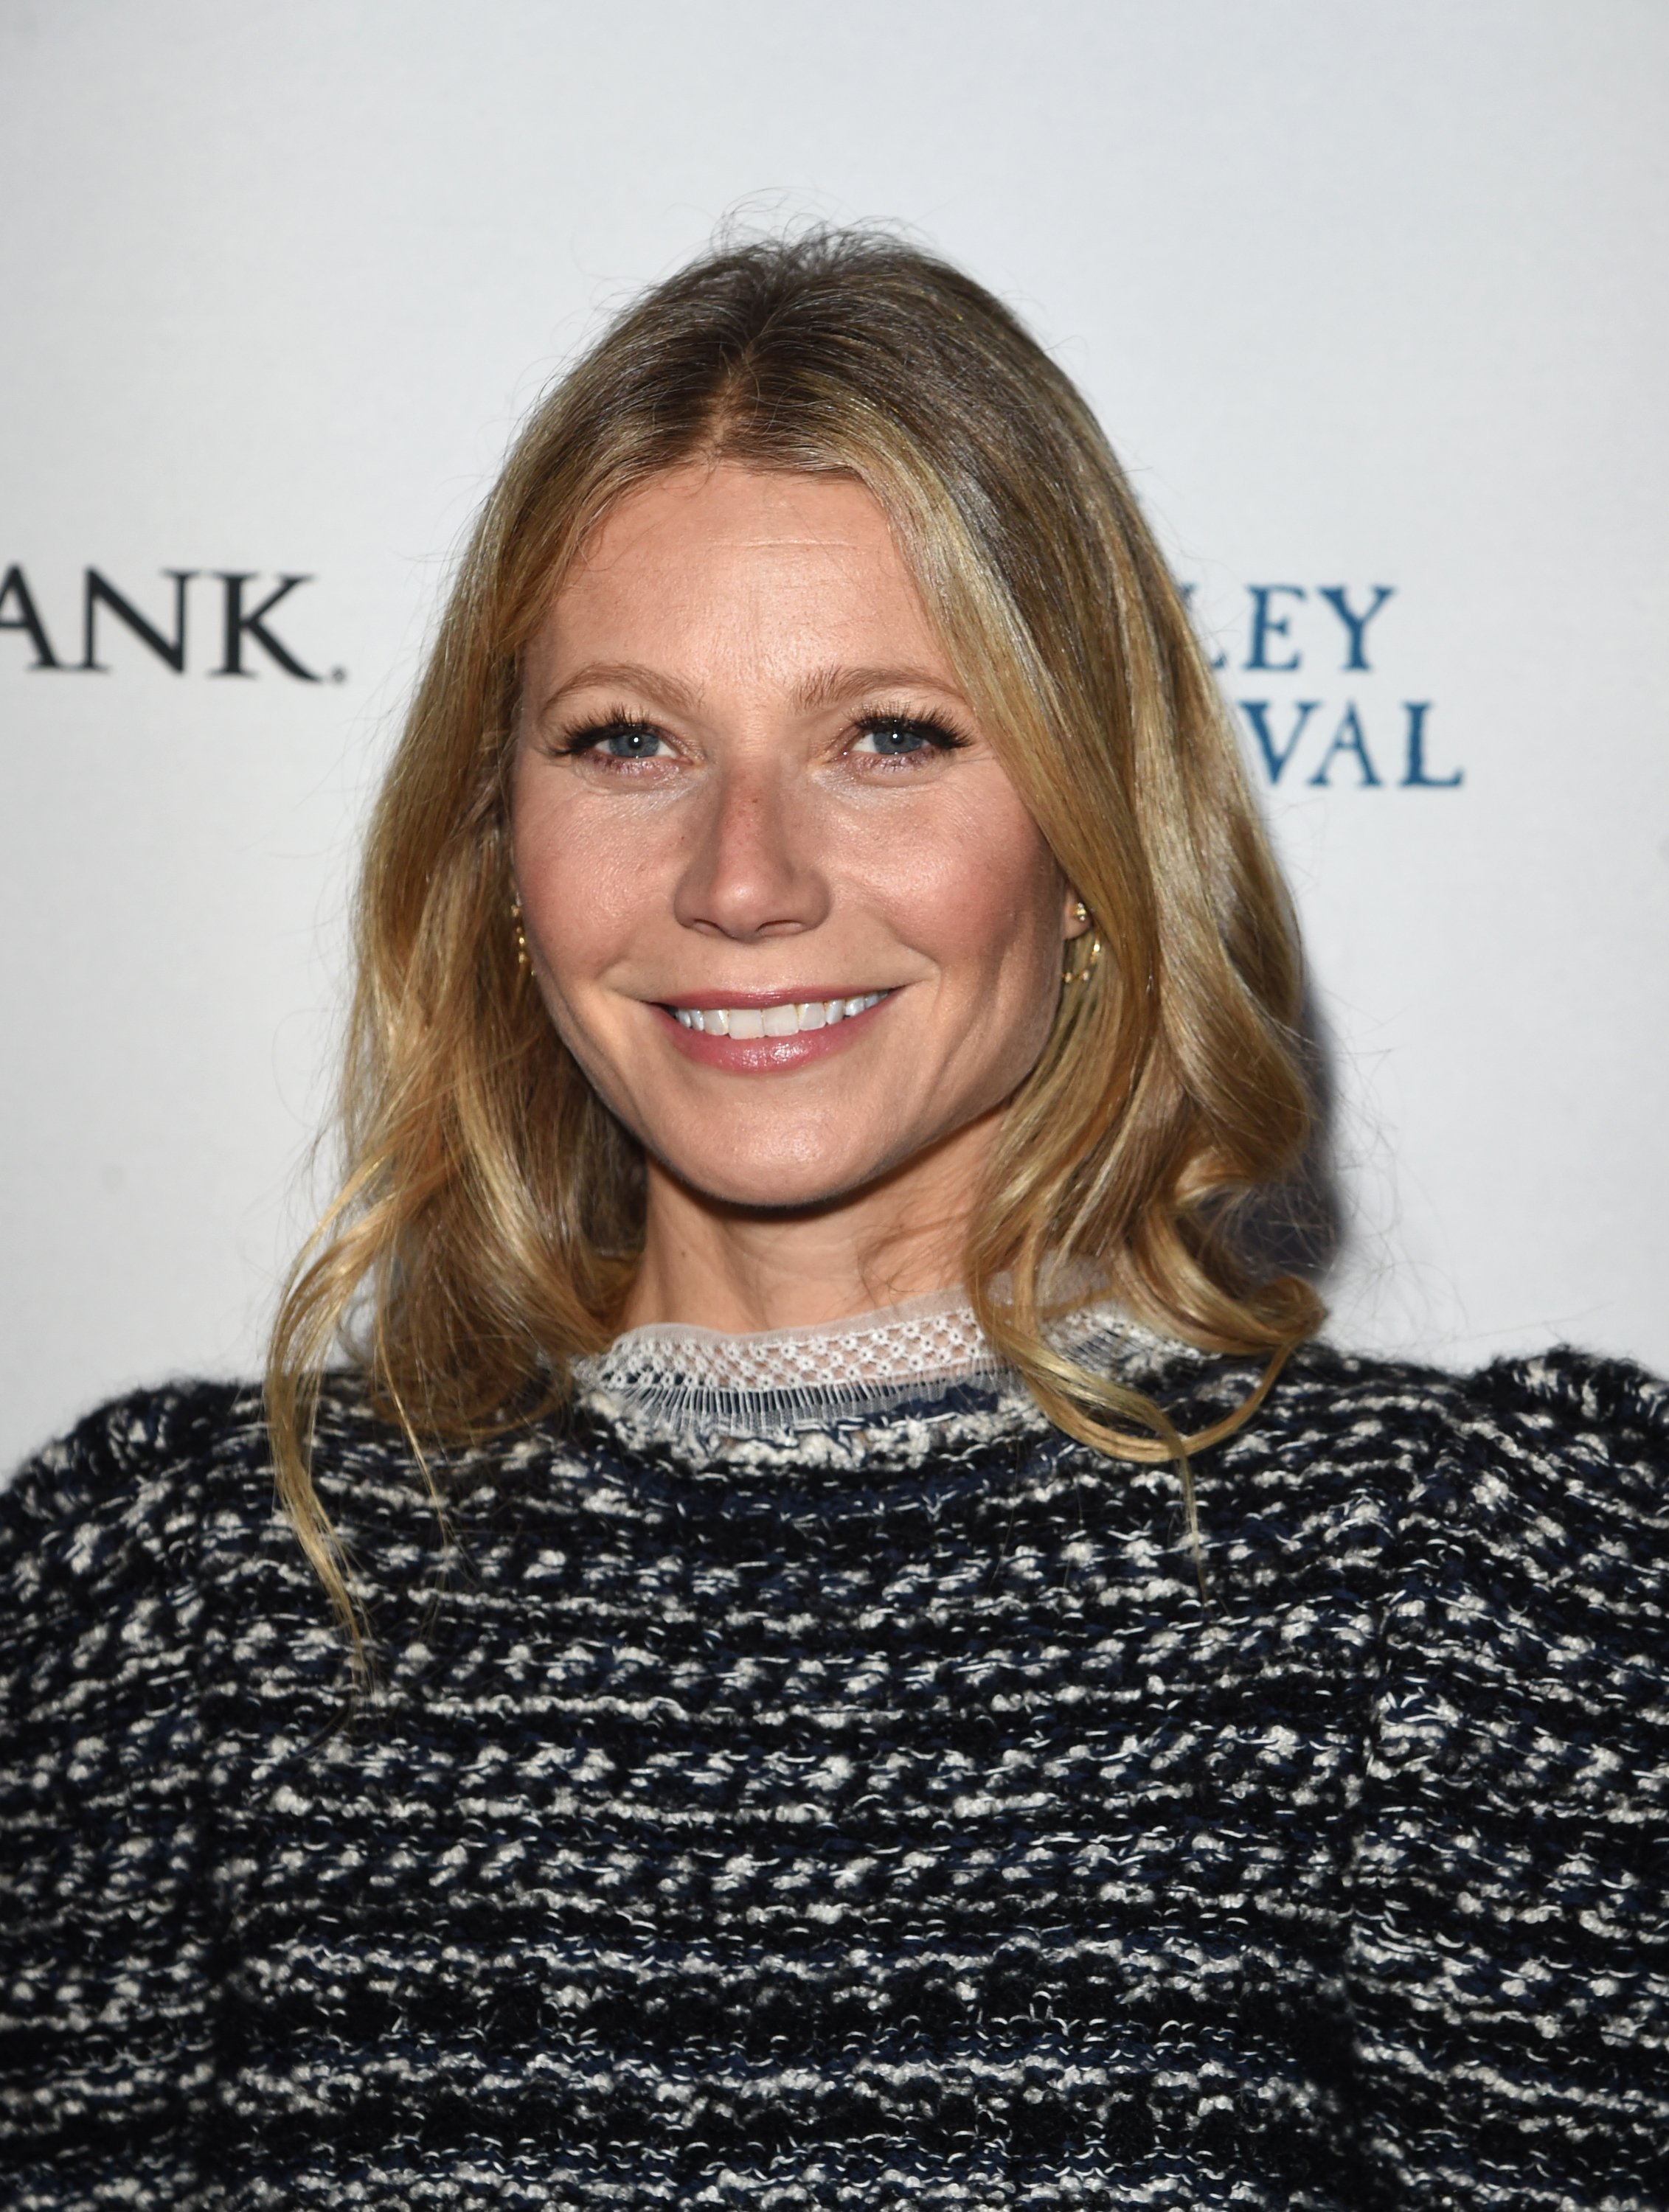 Qwyneth Paltrow pictured at the 2018 Sun Valley Film Festival - Vision Award Dinner, Idaho, 2018. | Photo: Getty Images